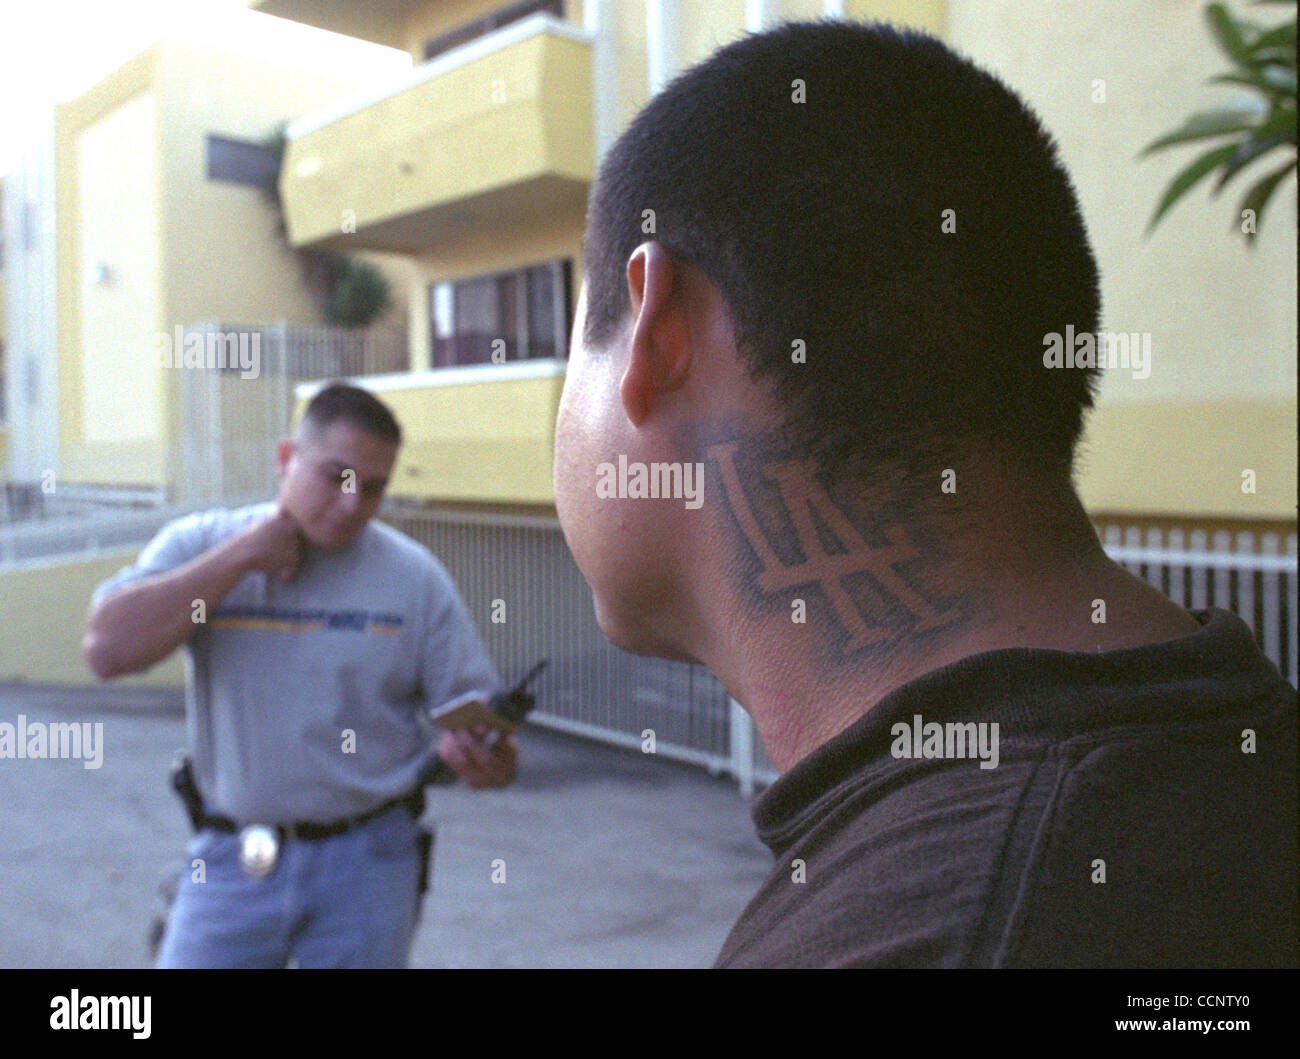 Arturo Larios, 27, (foreground) is questioned by Los Angeles police officer Frank Flores (background) in a Hollywood, California, neighborhood. Larios joined the Mara Salvatrucha 13 gang while he was living in Guatemala.  Photographer:  Luis J. Jimenez City: Hollywood State: California Country: USA  Stock Photo